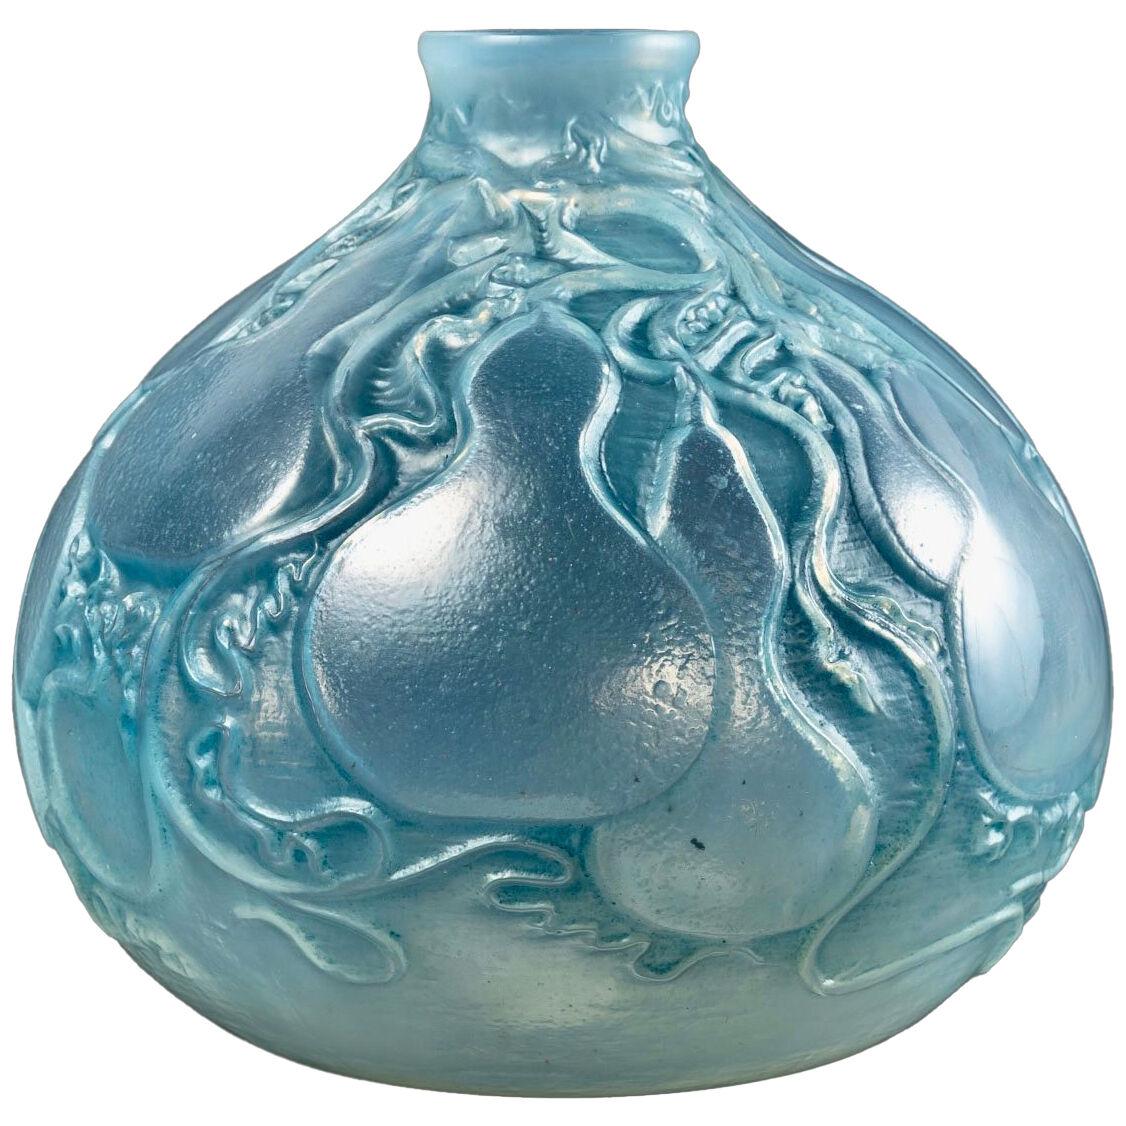 1914 René Lalique - Vase Courges Double Cased Opalescent Glass With Blue Patina